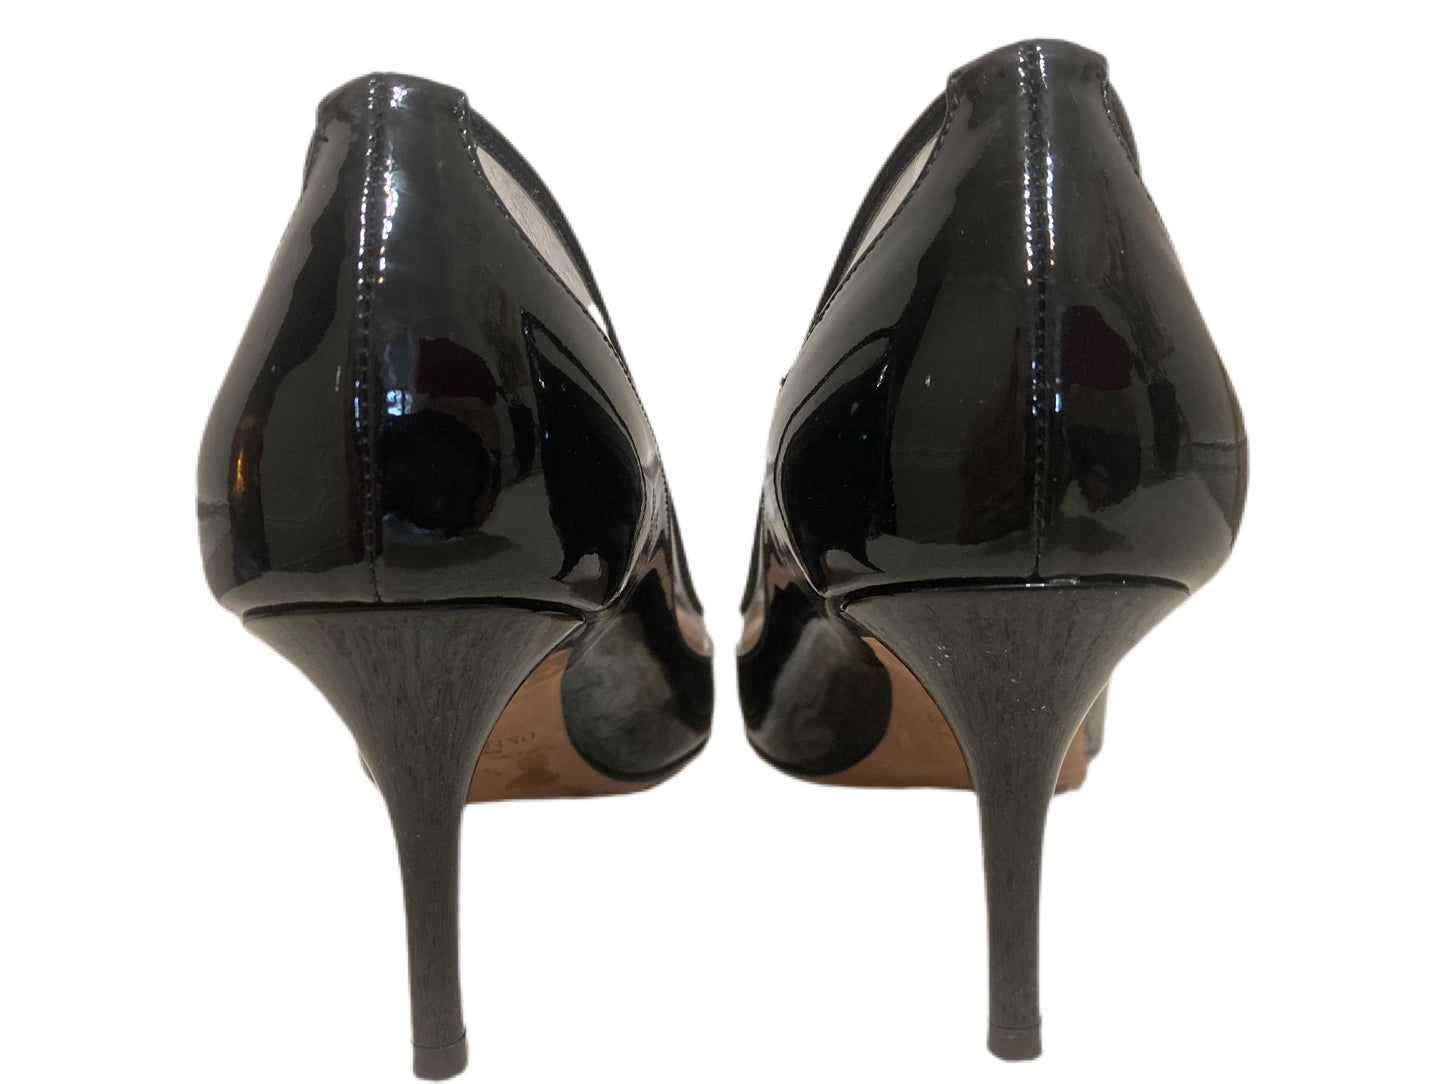 VALENTINO Patent Leather Pointed Toe Pumps Black Size 36.5